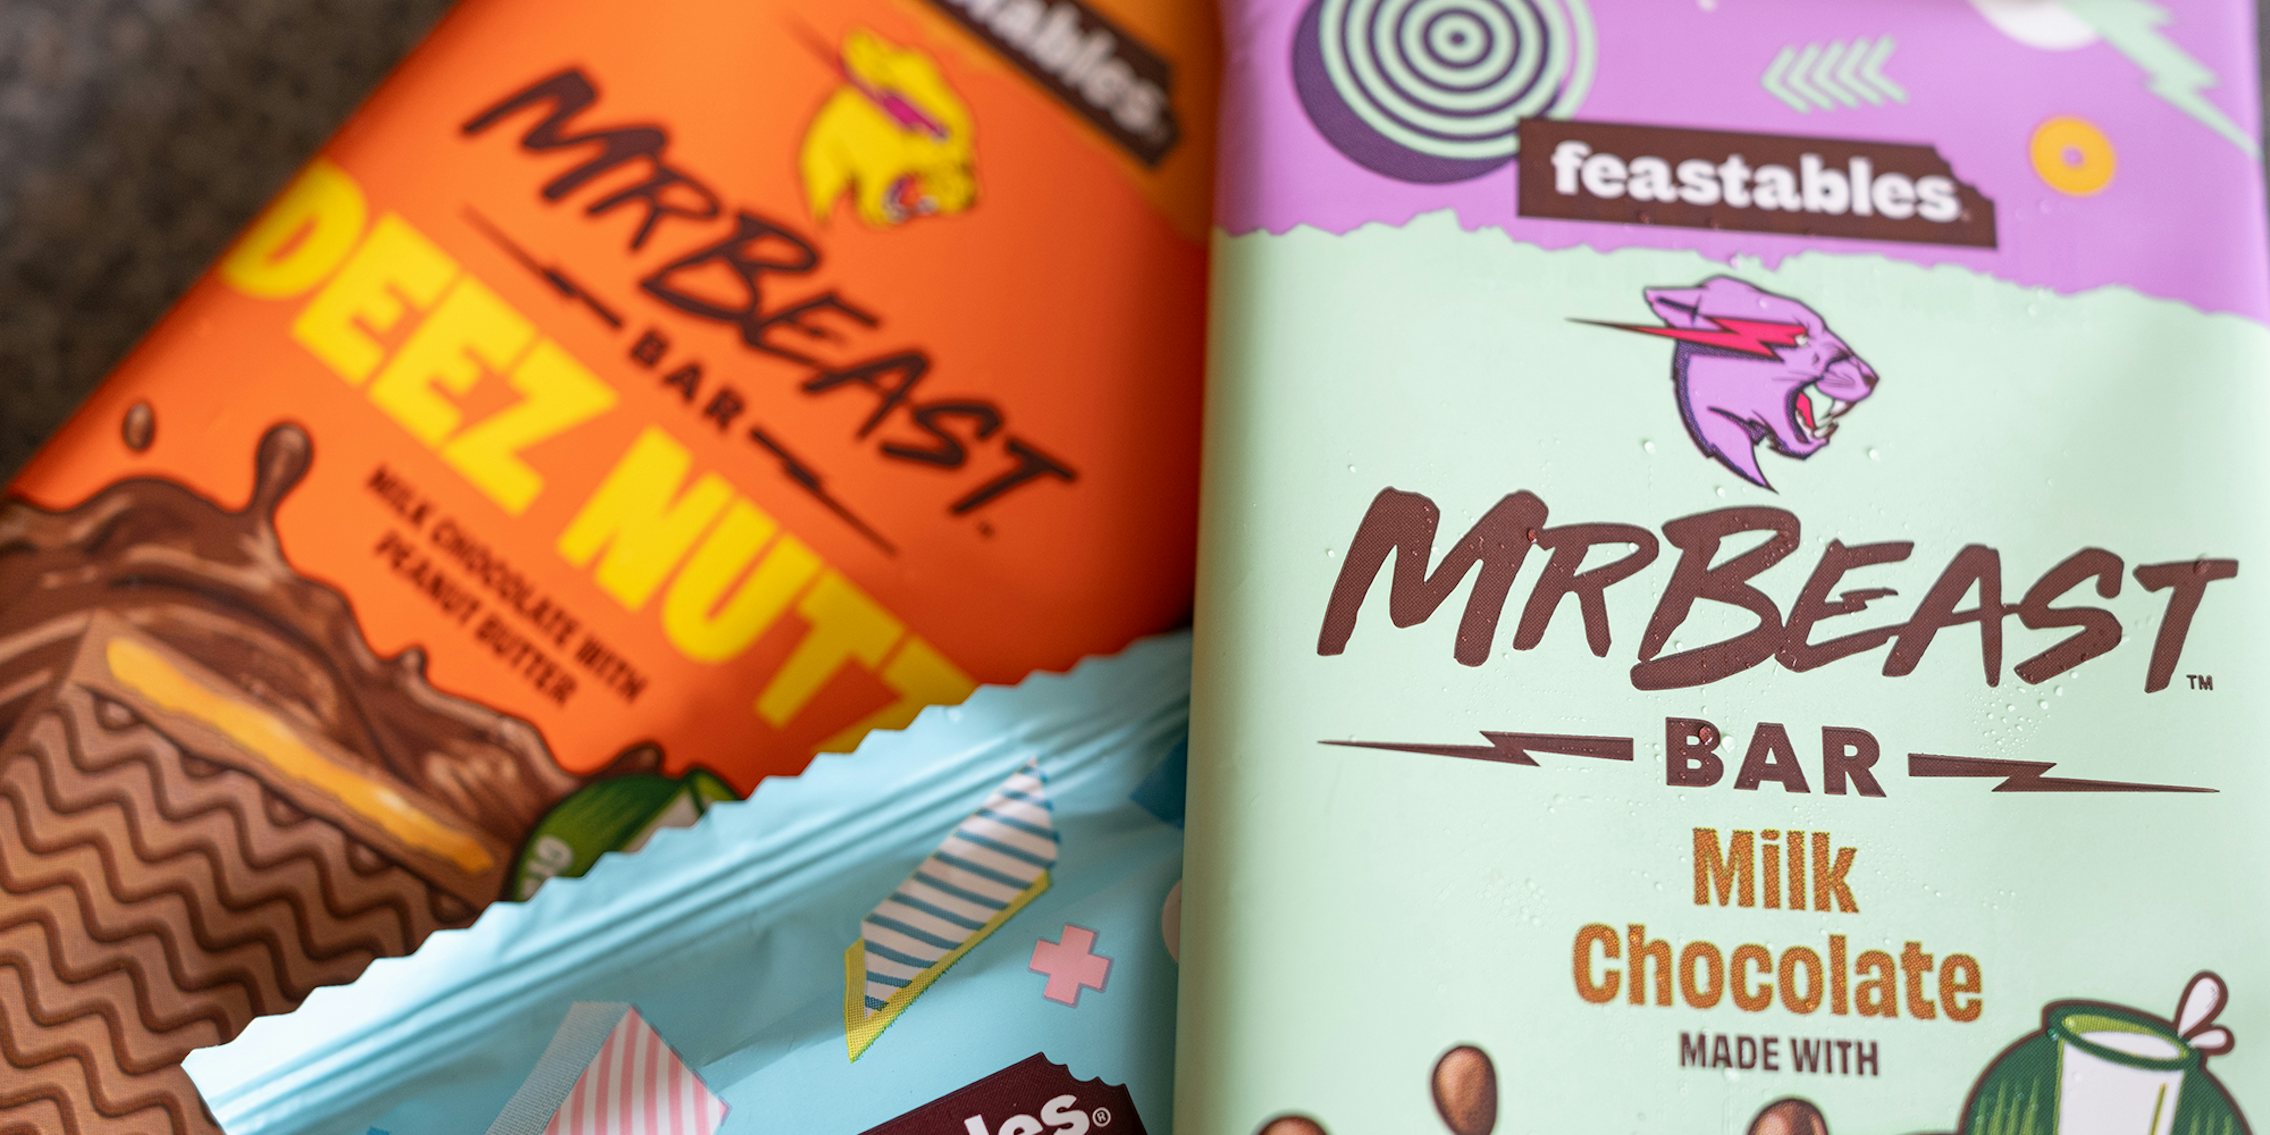 Mr. Beast deez nutz chocolate company Feastables sued by Dees Nuts LLC for trademark infringement